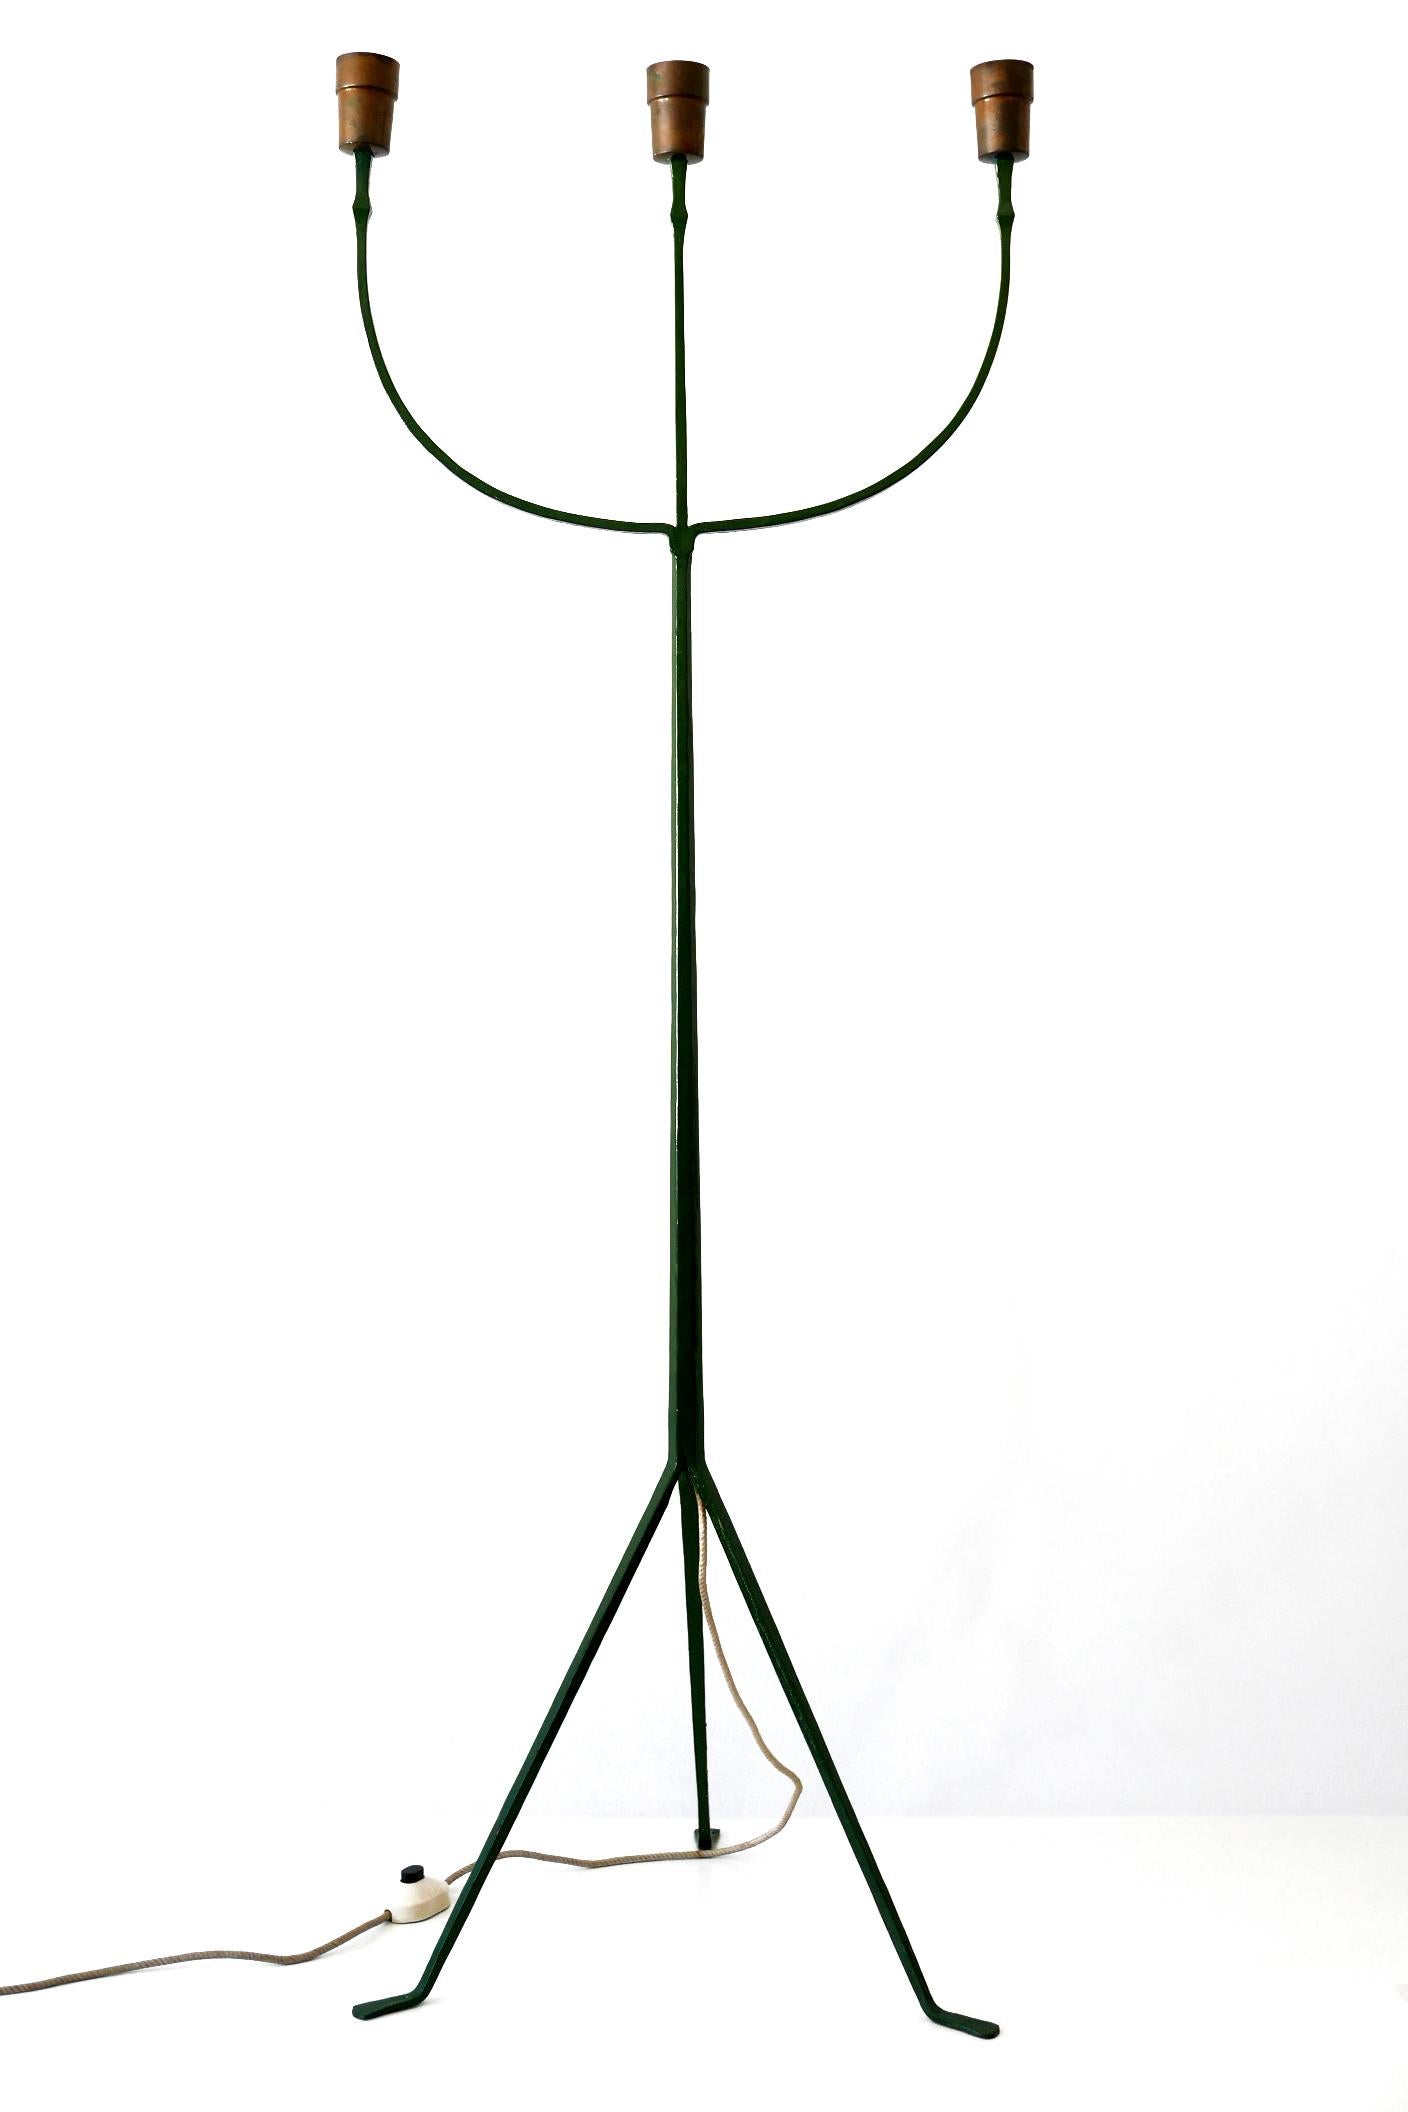 Exceptional Mid-Century Modern Three Flamed Floor Lamp, 1950s For Sale 5